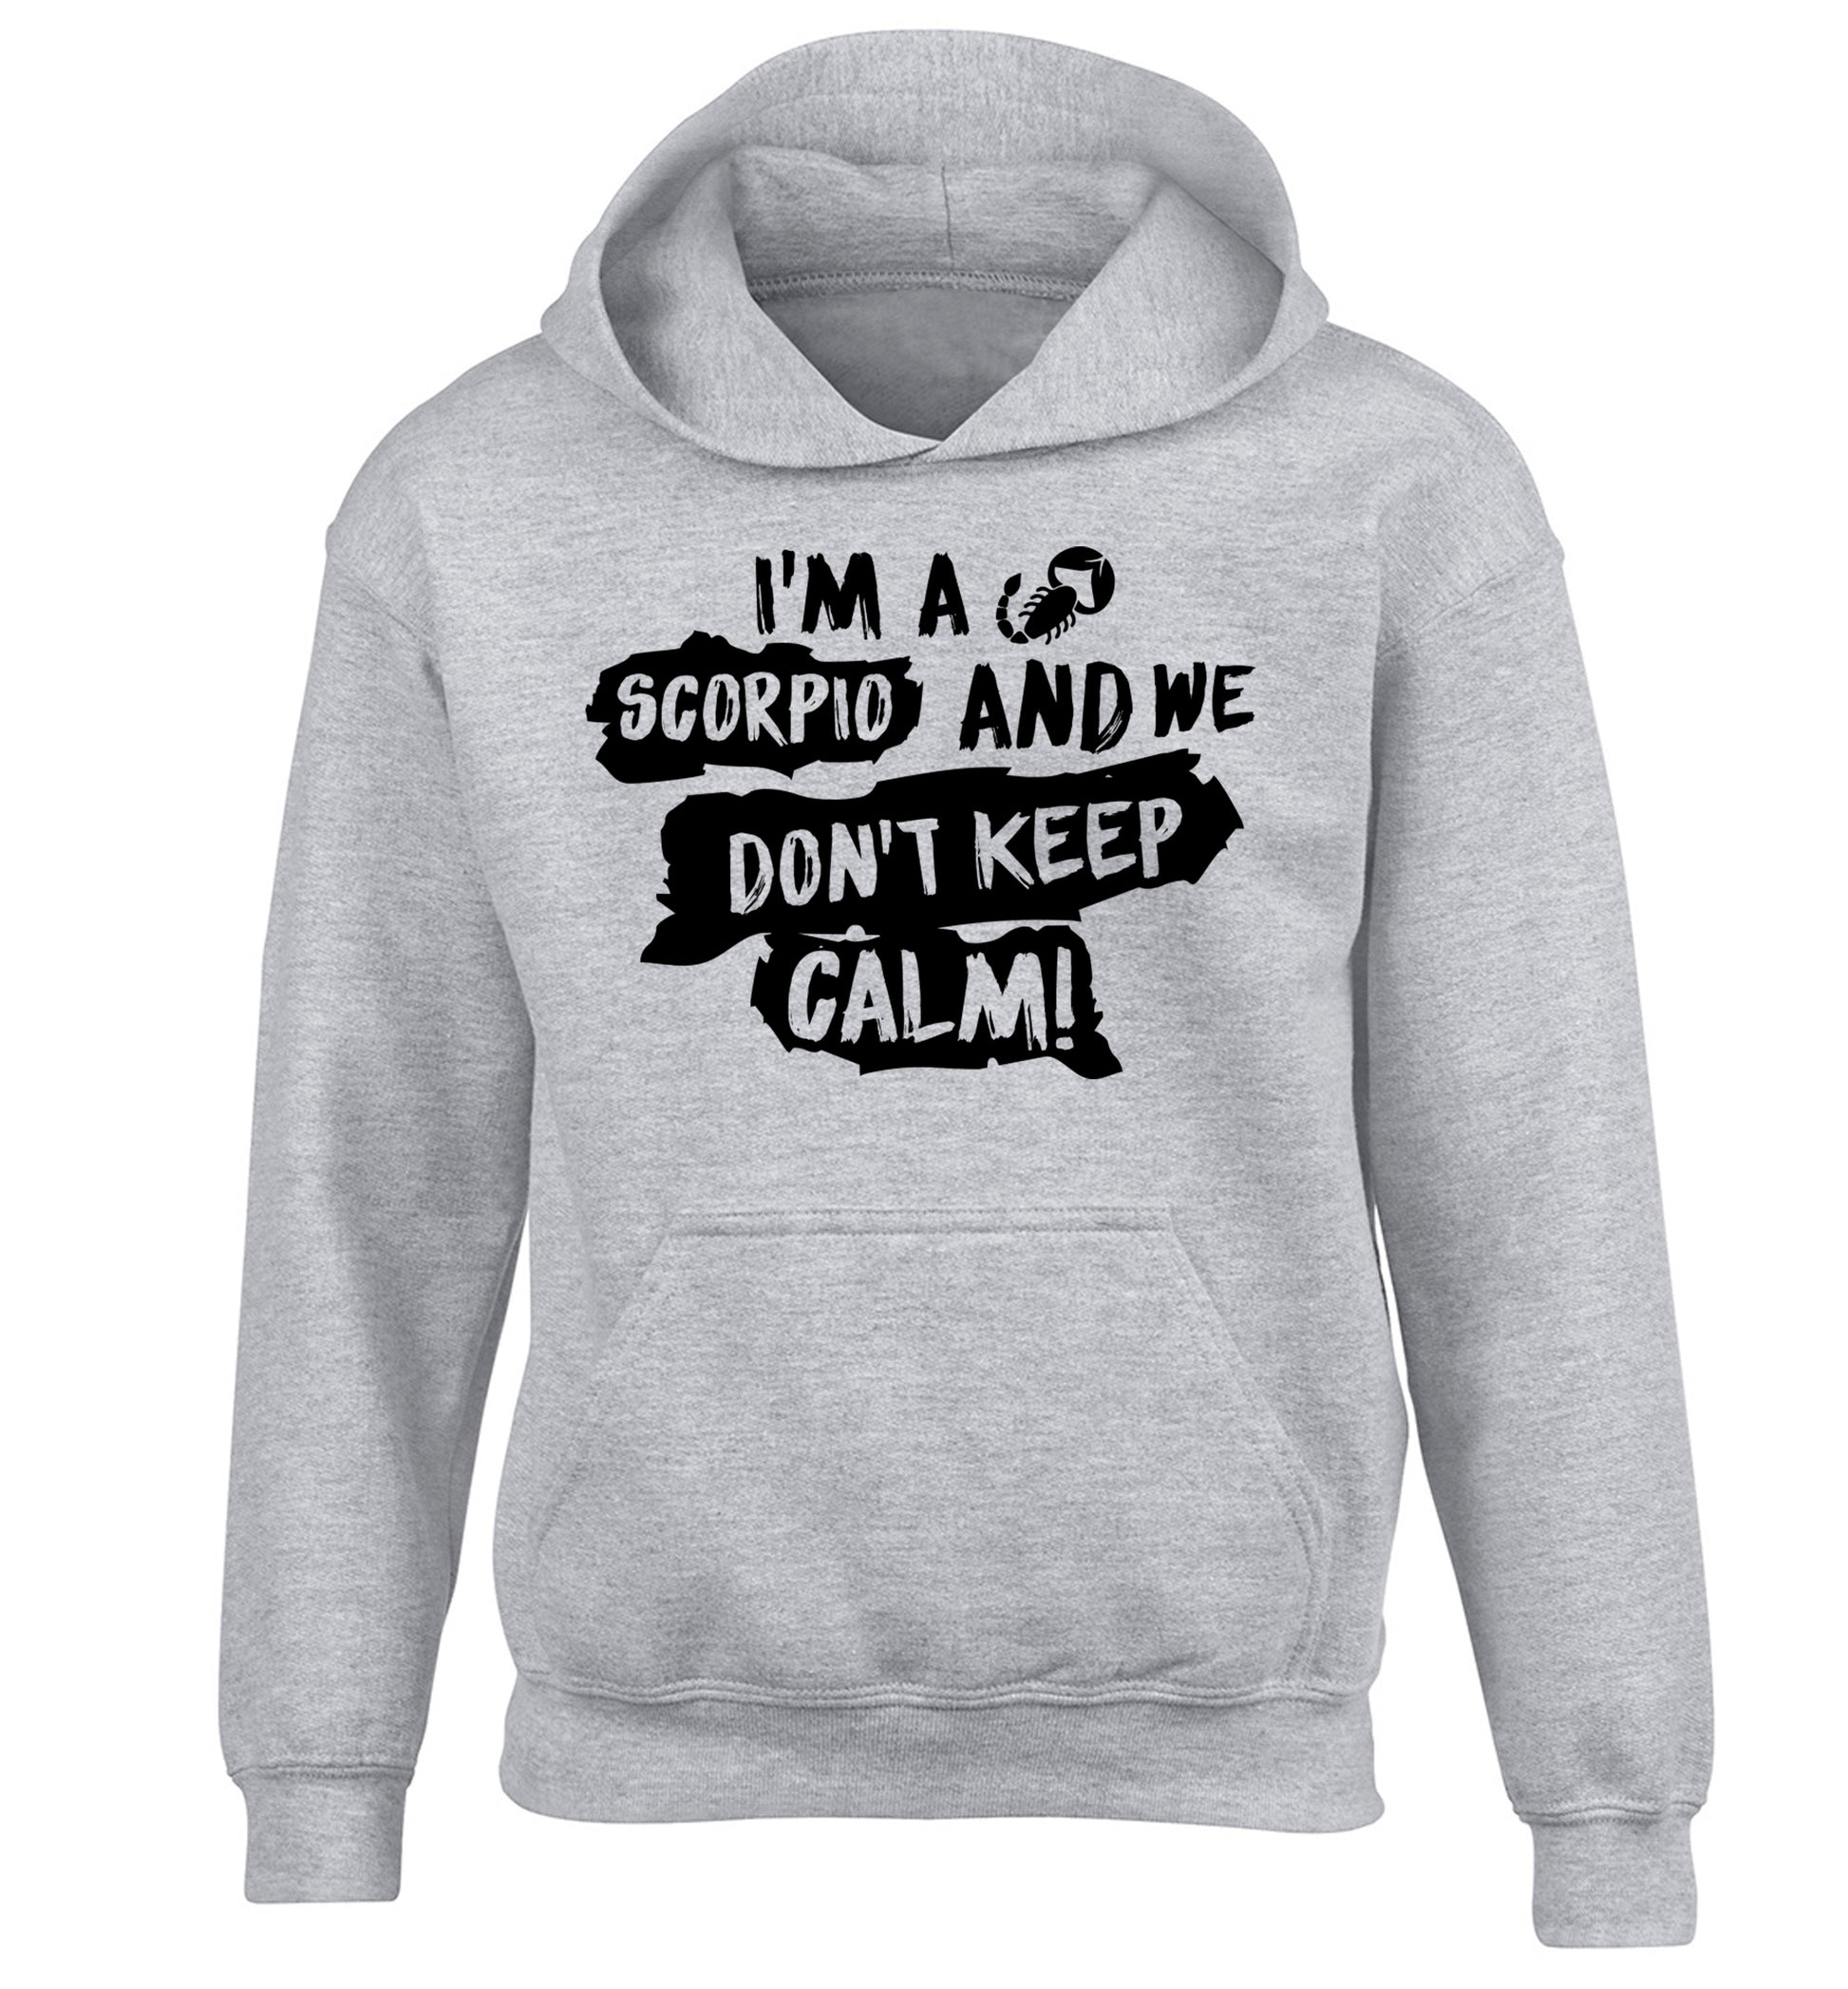 I'm a scorpio and we don't keep calm children's grey hoodie 12-13 Years